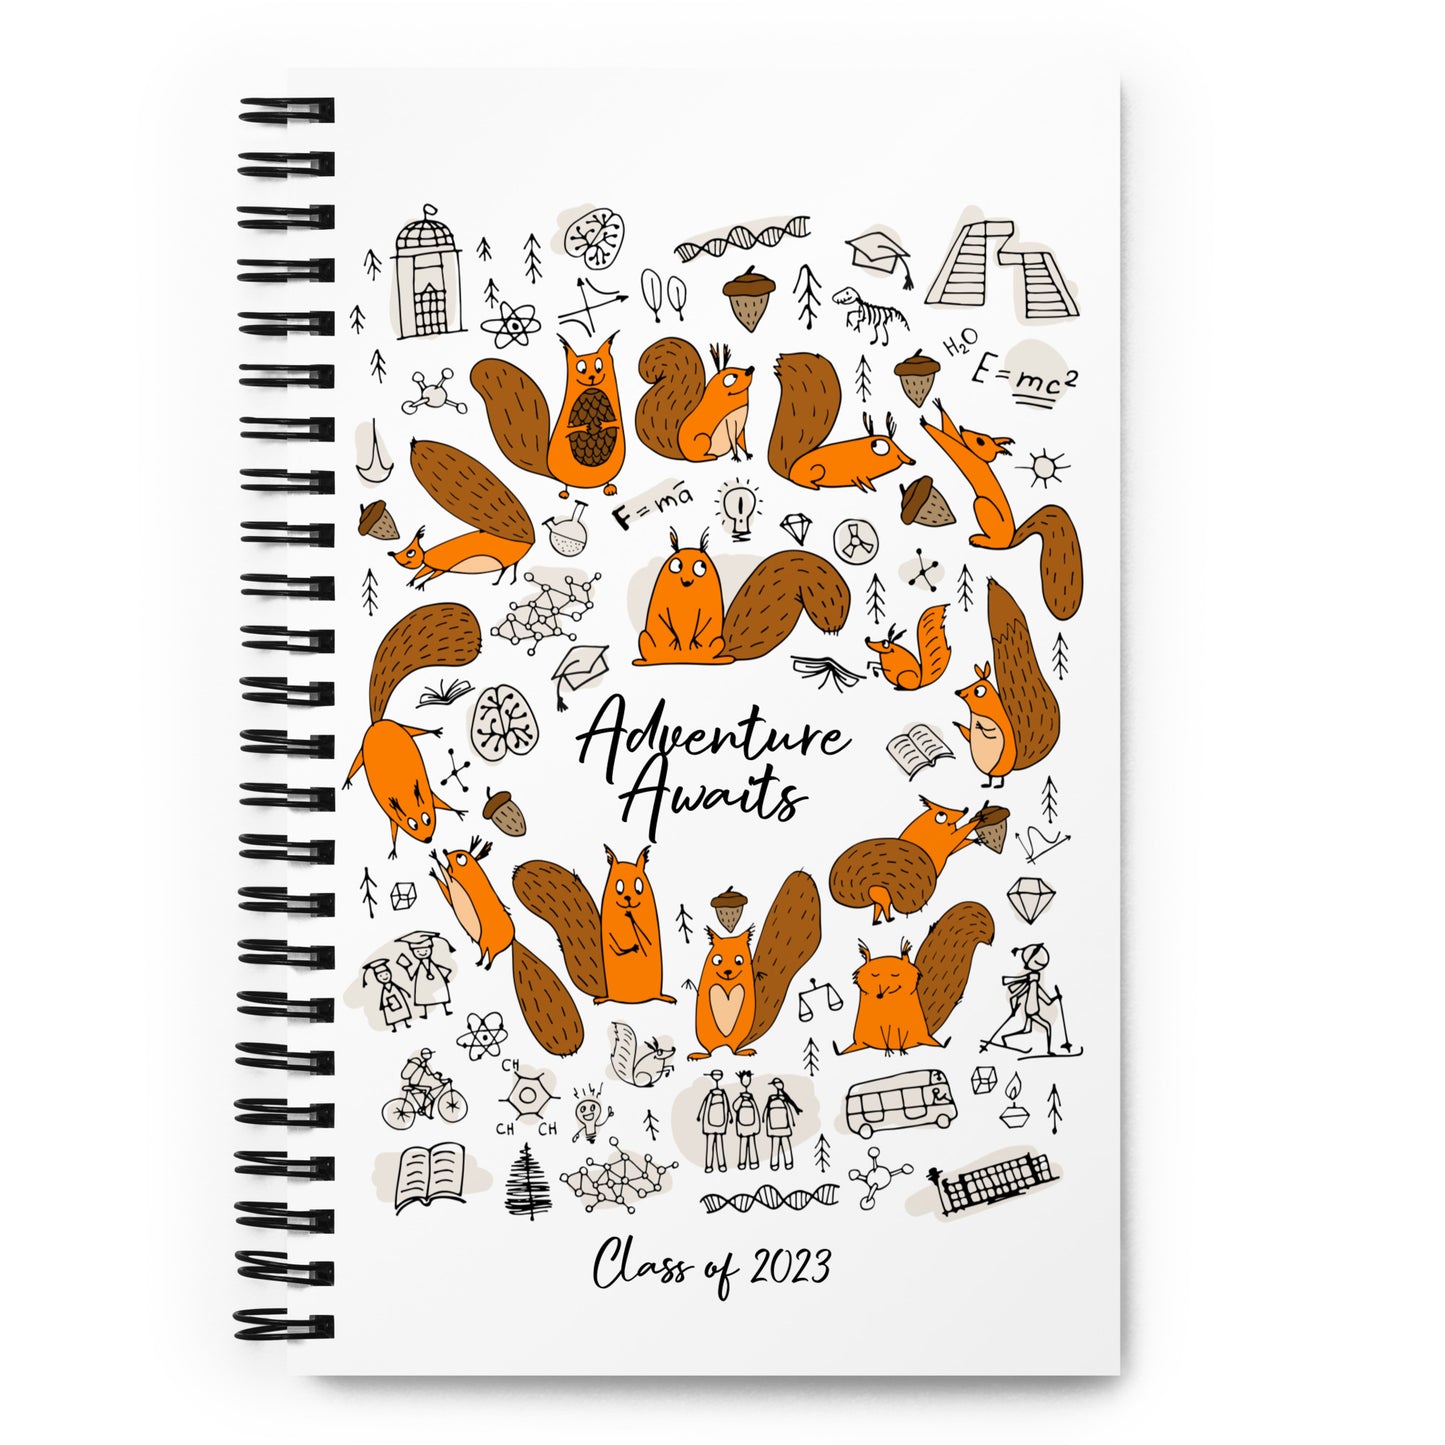 Funny science Squirrels. Spiral notebook personalised